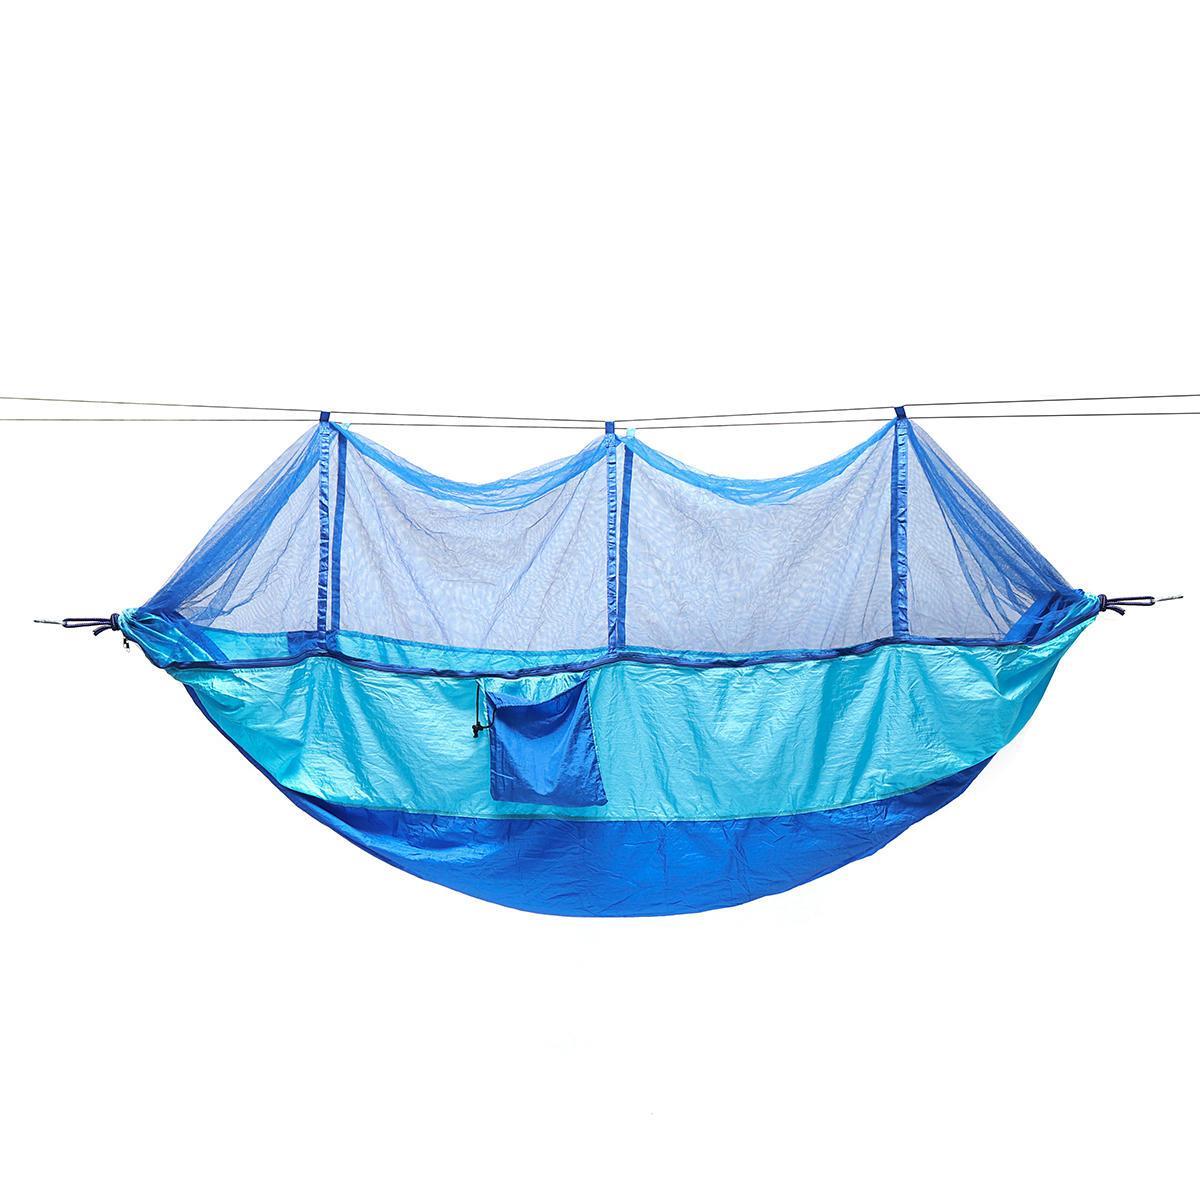 Outdoor Double 2 People Hammock Camping Tent Hanging Swing Bed With Mosquito Net BLUE SKY BLUE SPELL